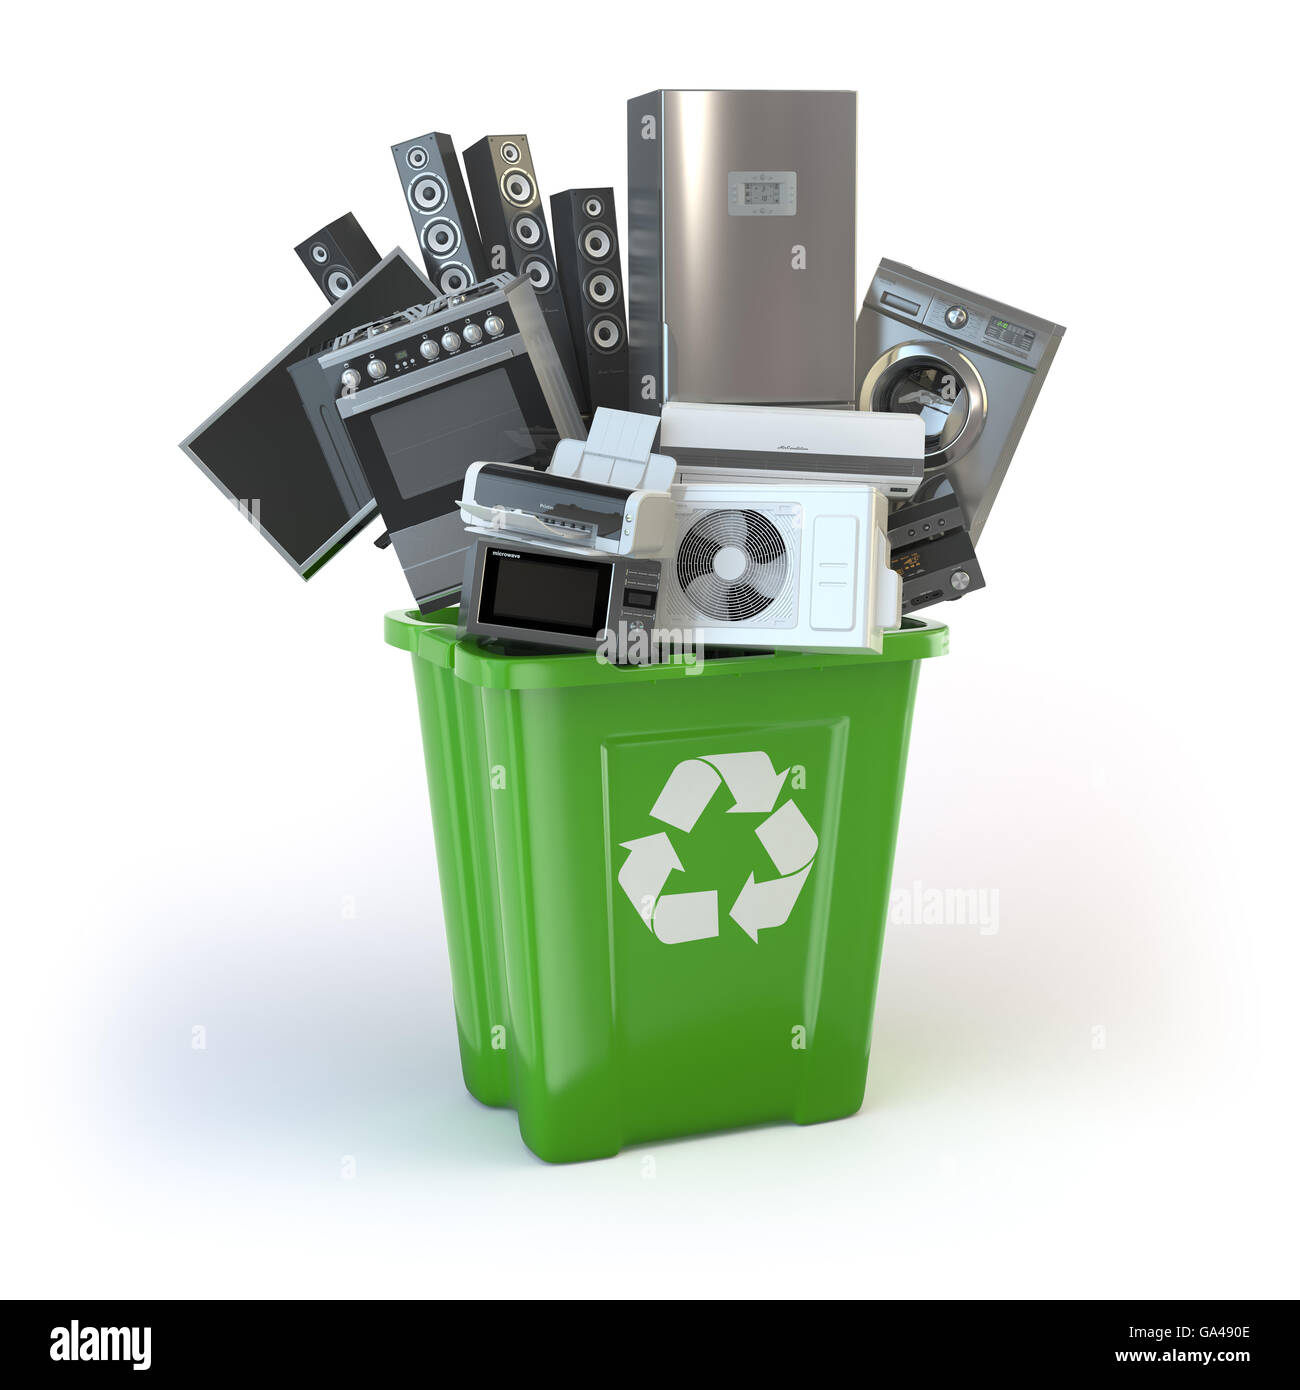 Old kitchen appliances in the rubbish bin isolated on white. Time to change home technics. Recycling concept. 3d illustration Stock Photo